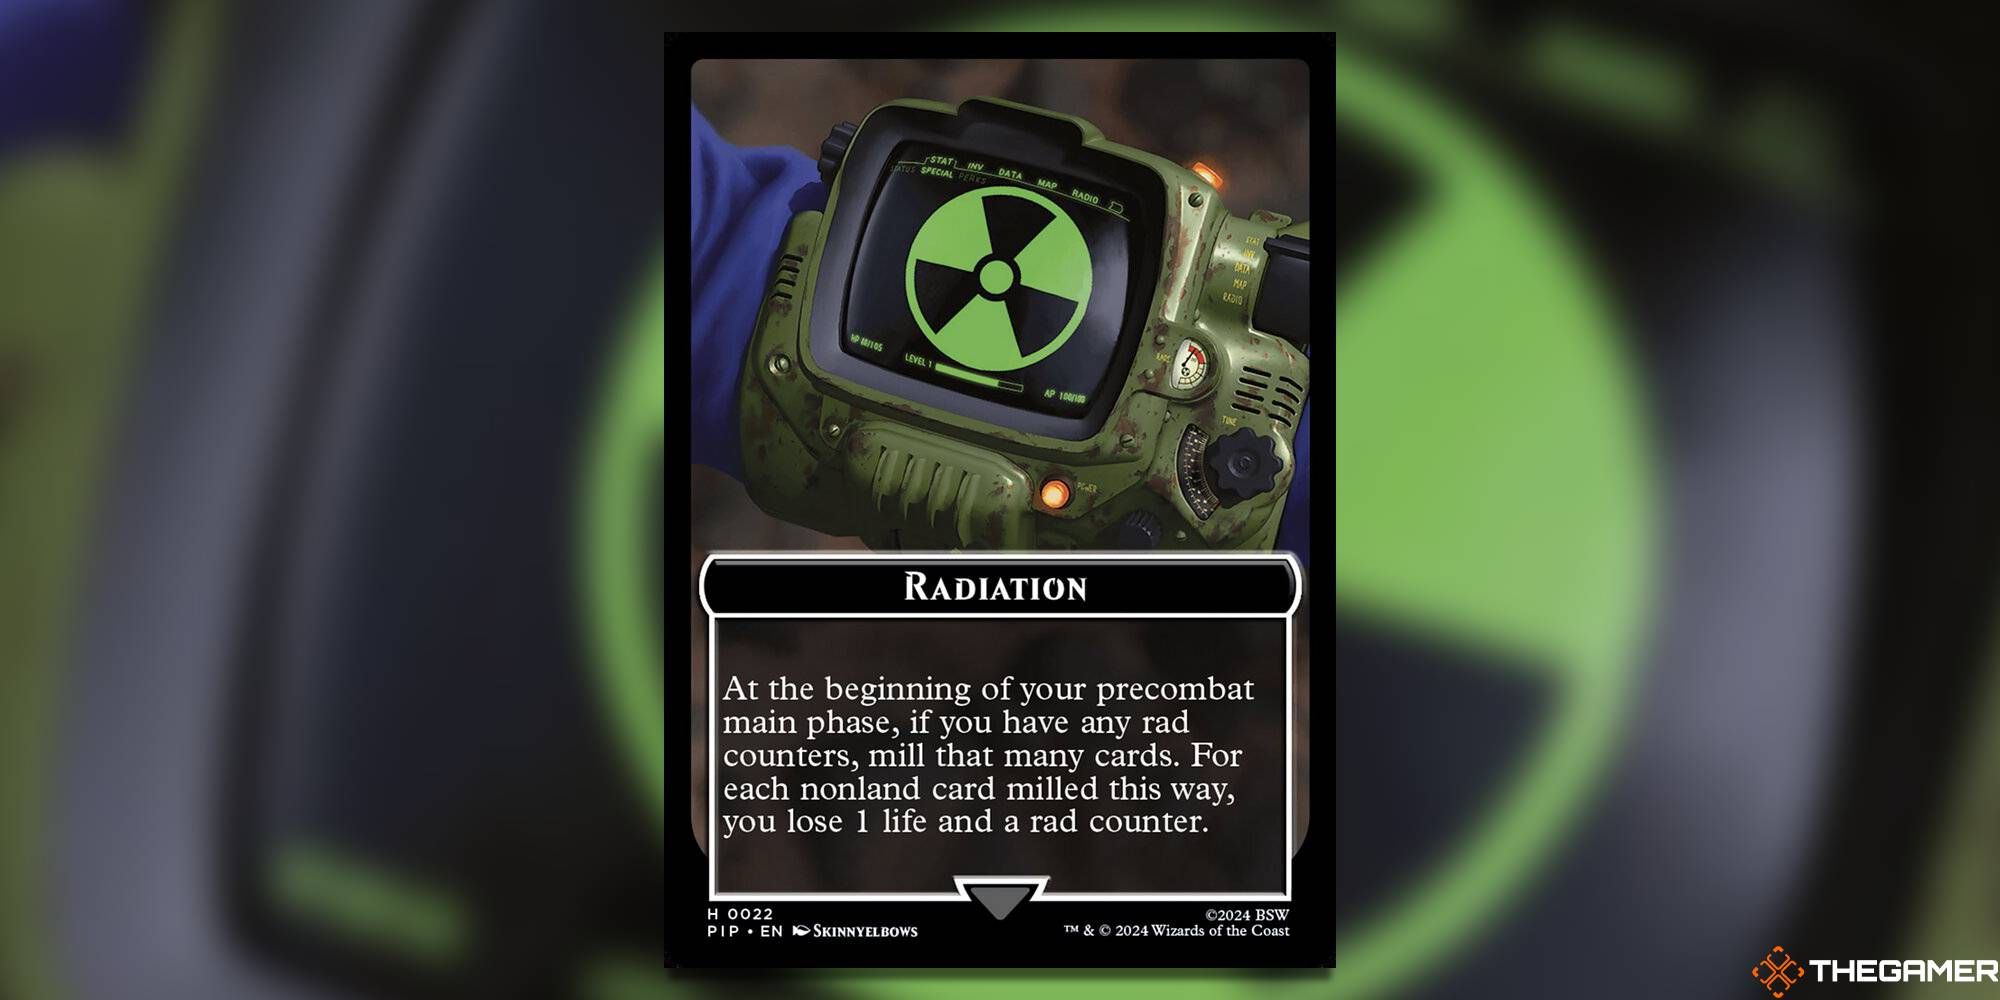 The Radiation card is used to track rad counters.